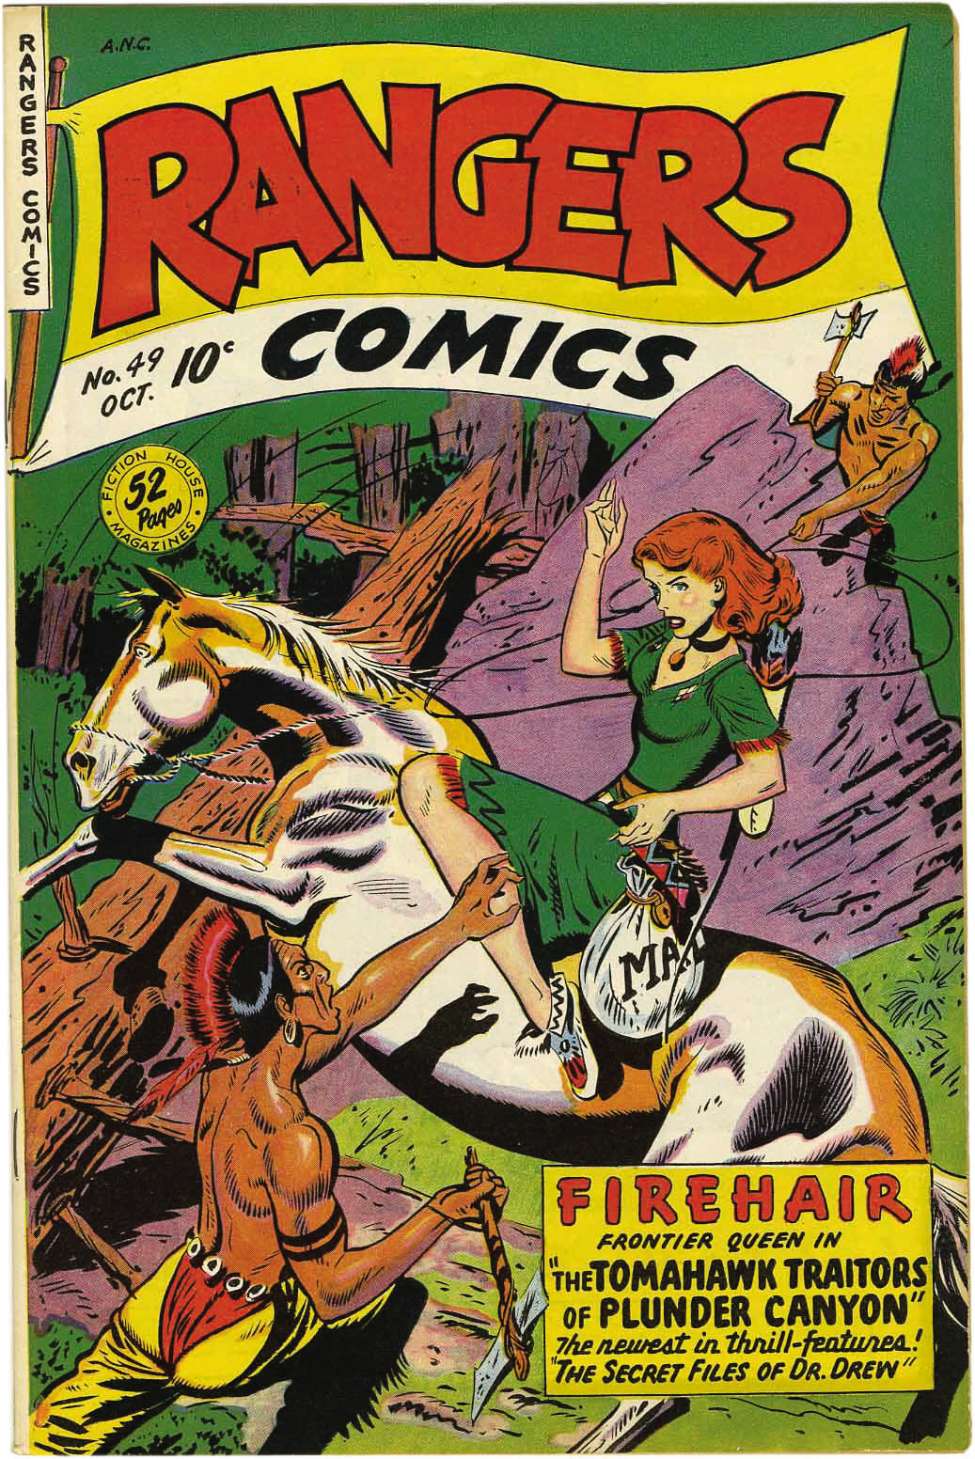 Book Cover For Rangers Comics 49